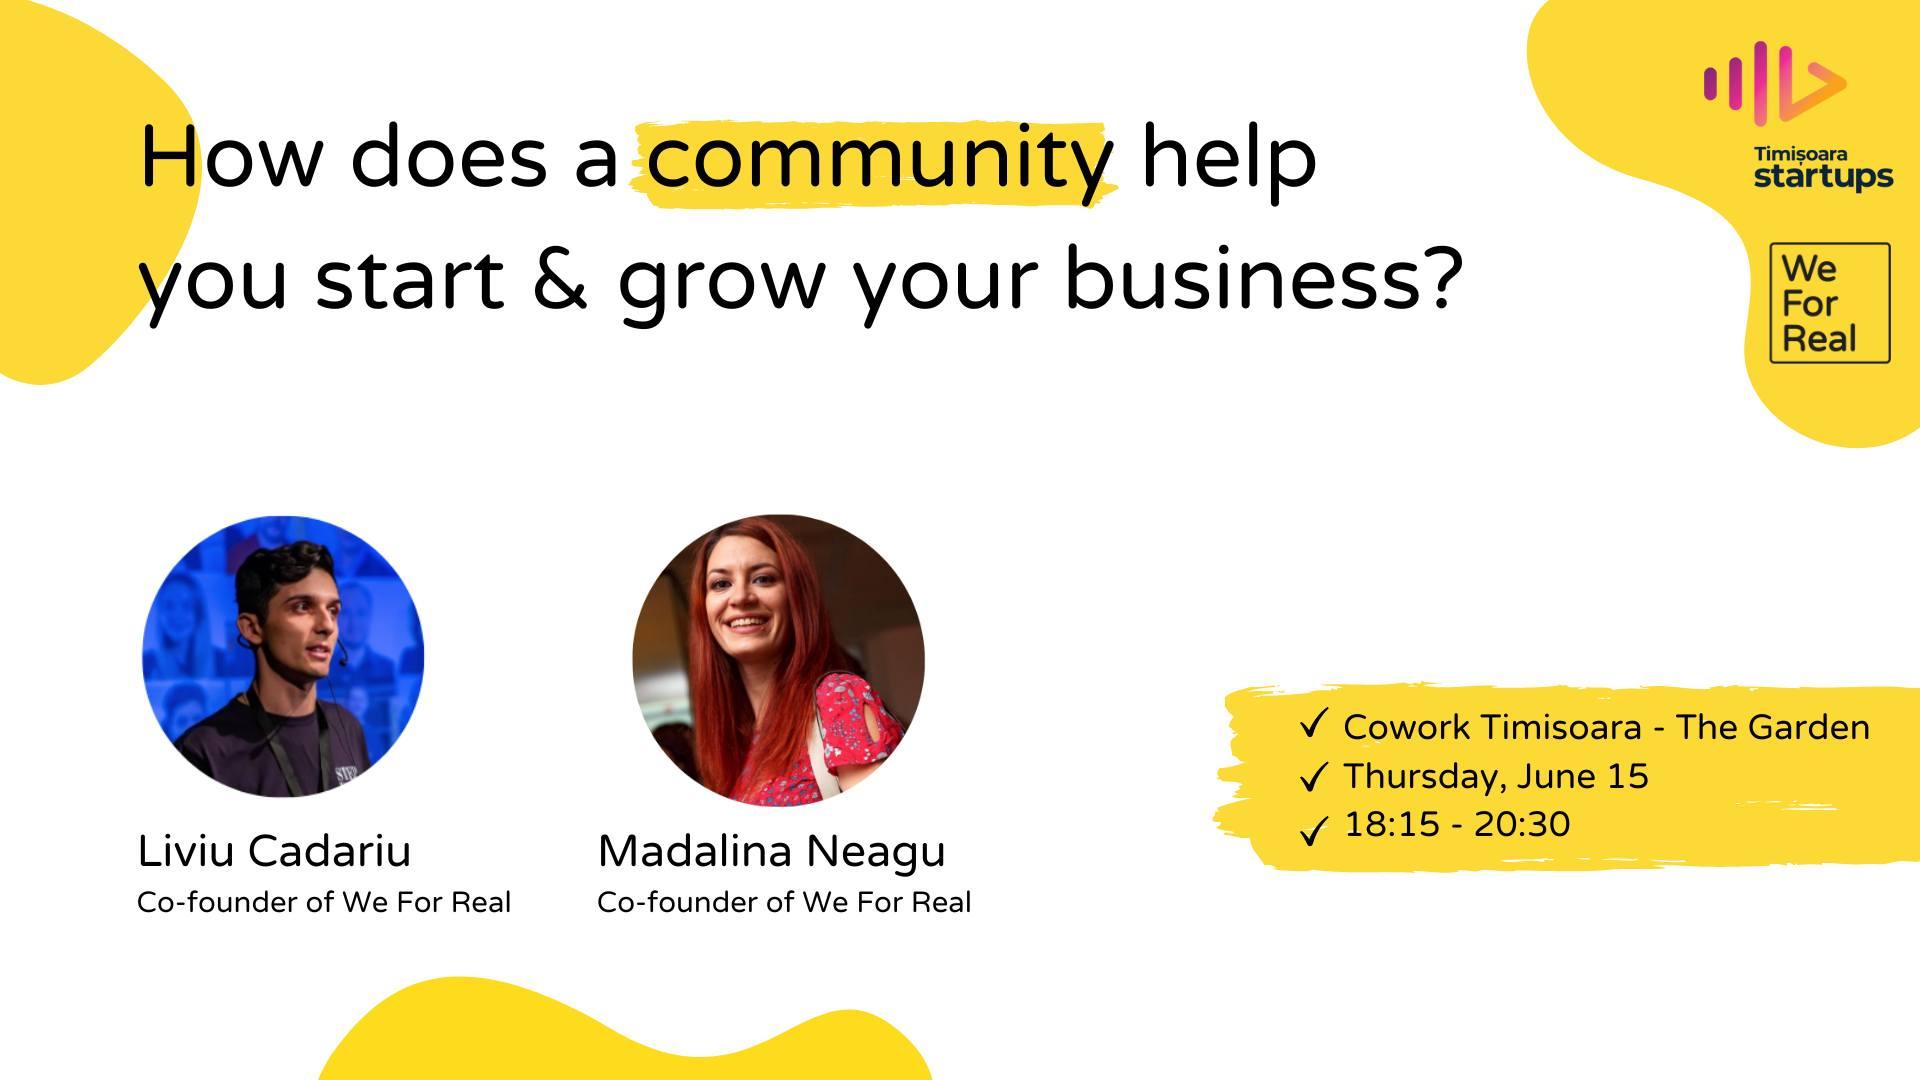 How does a community help you start &grow your business